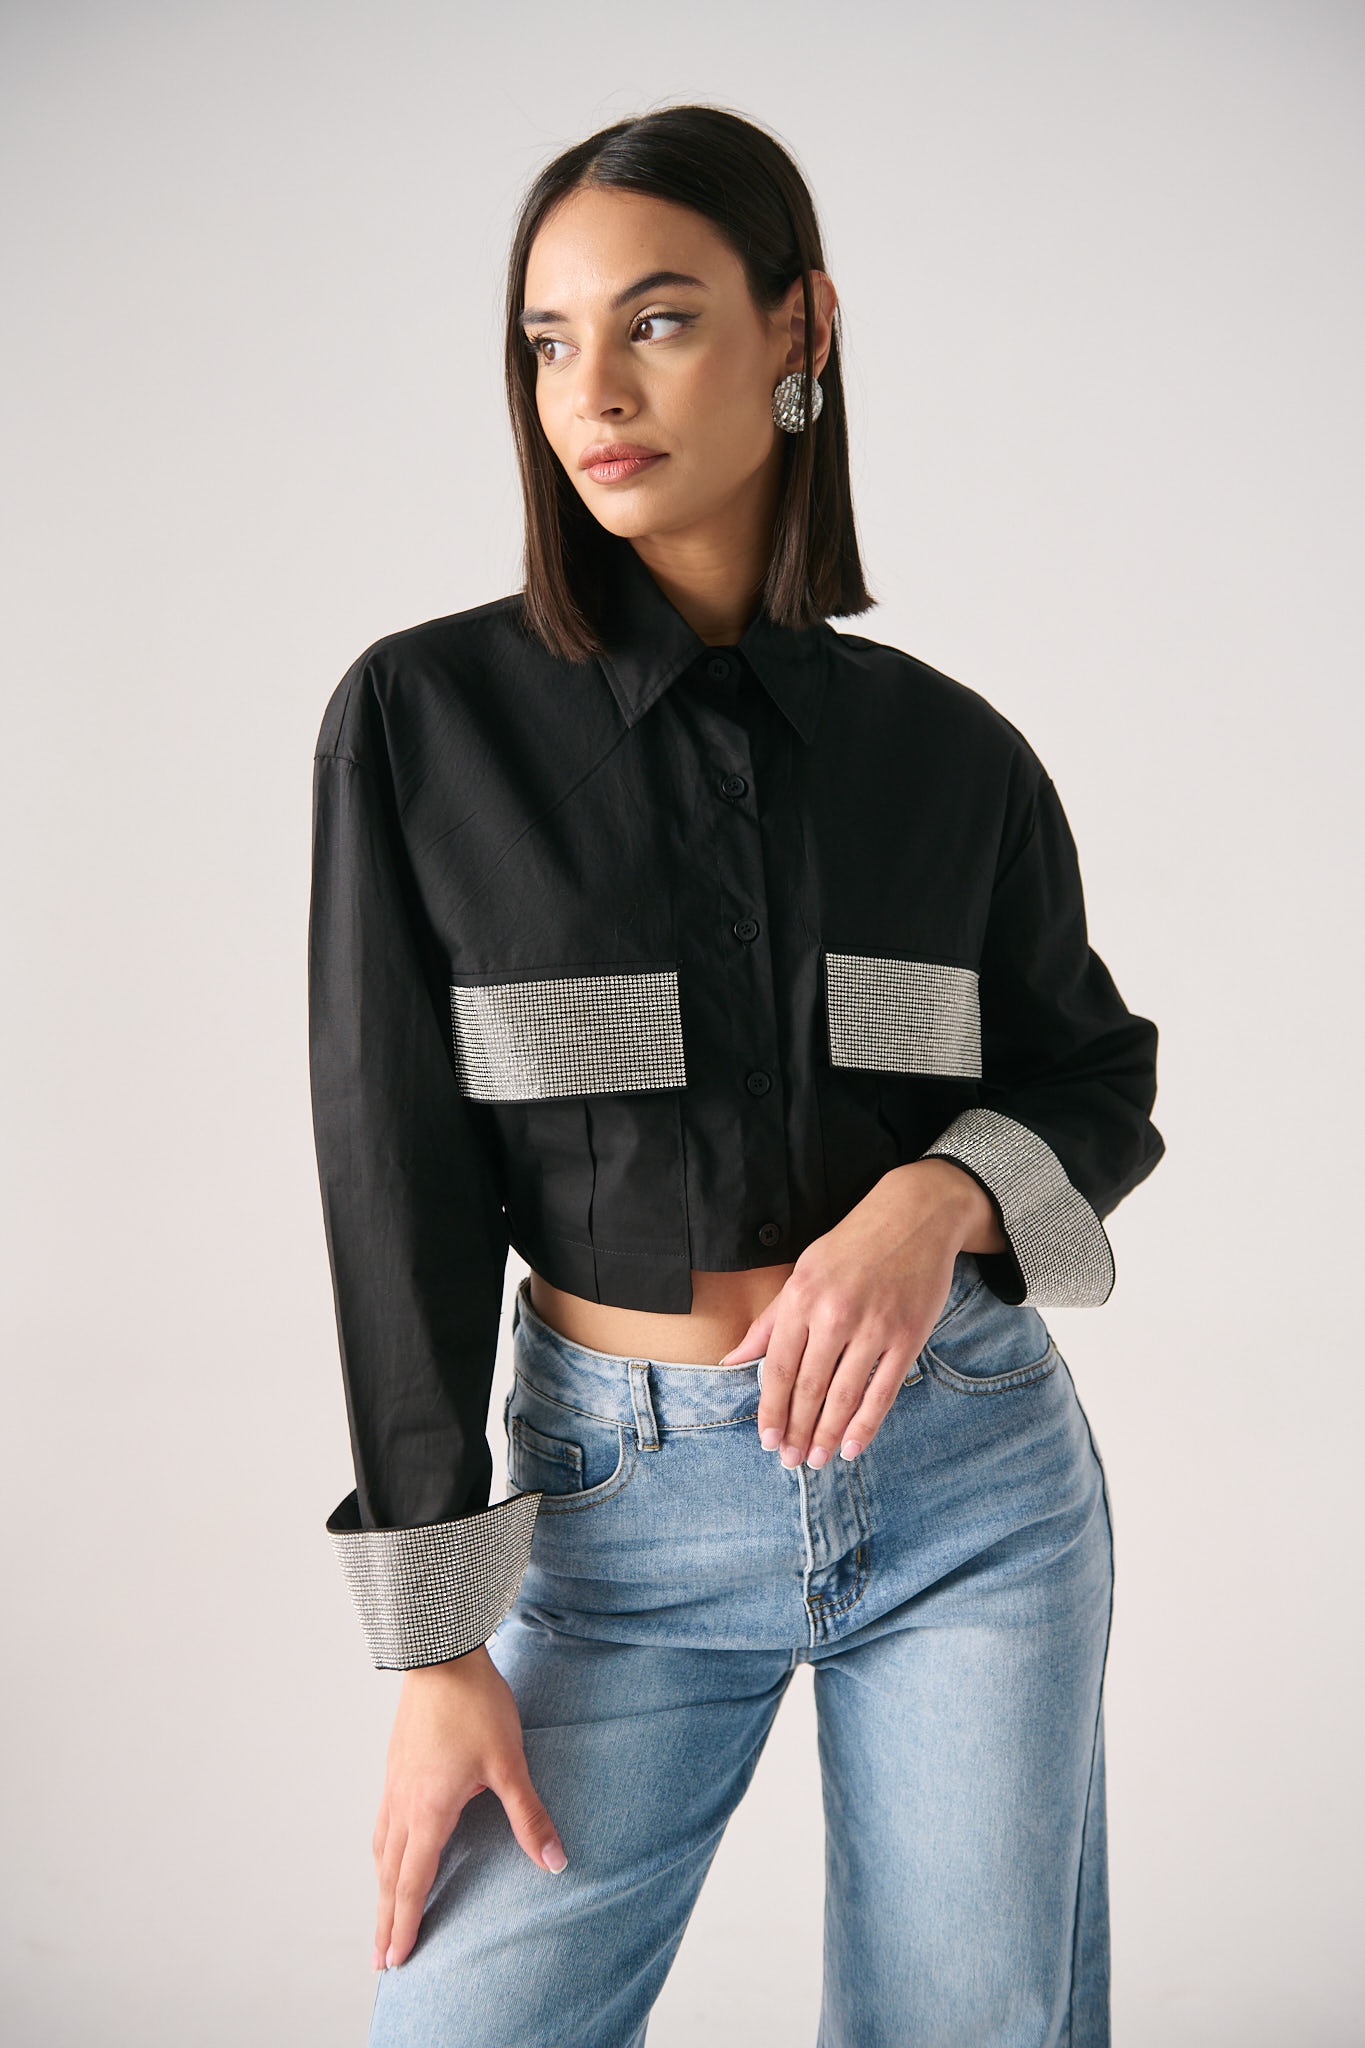 Crop Shirt With Rhinestones On The Pockets